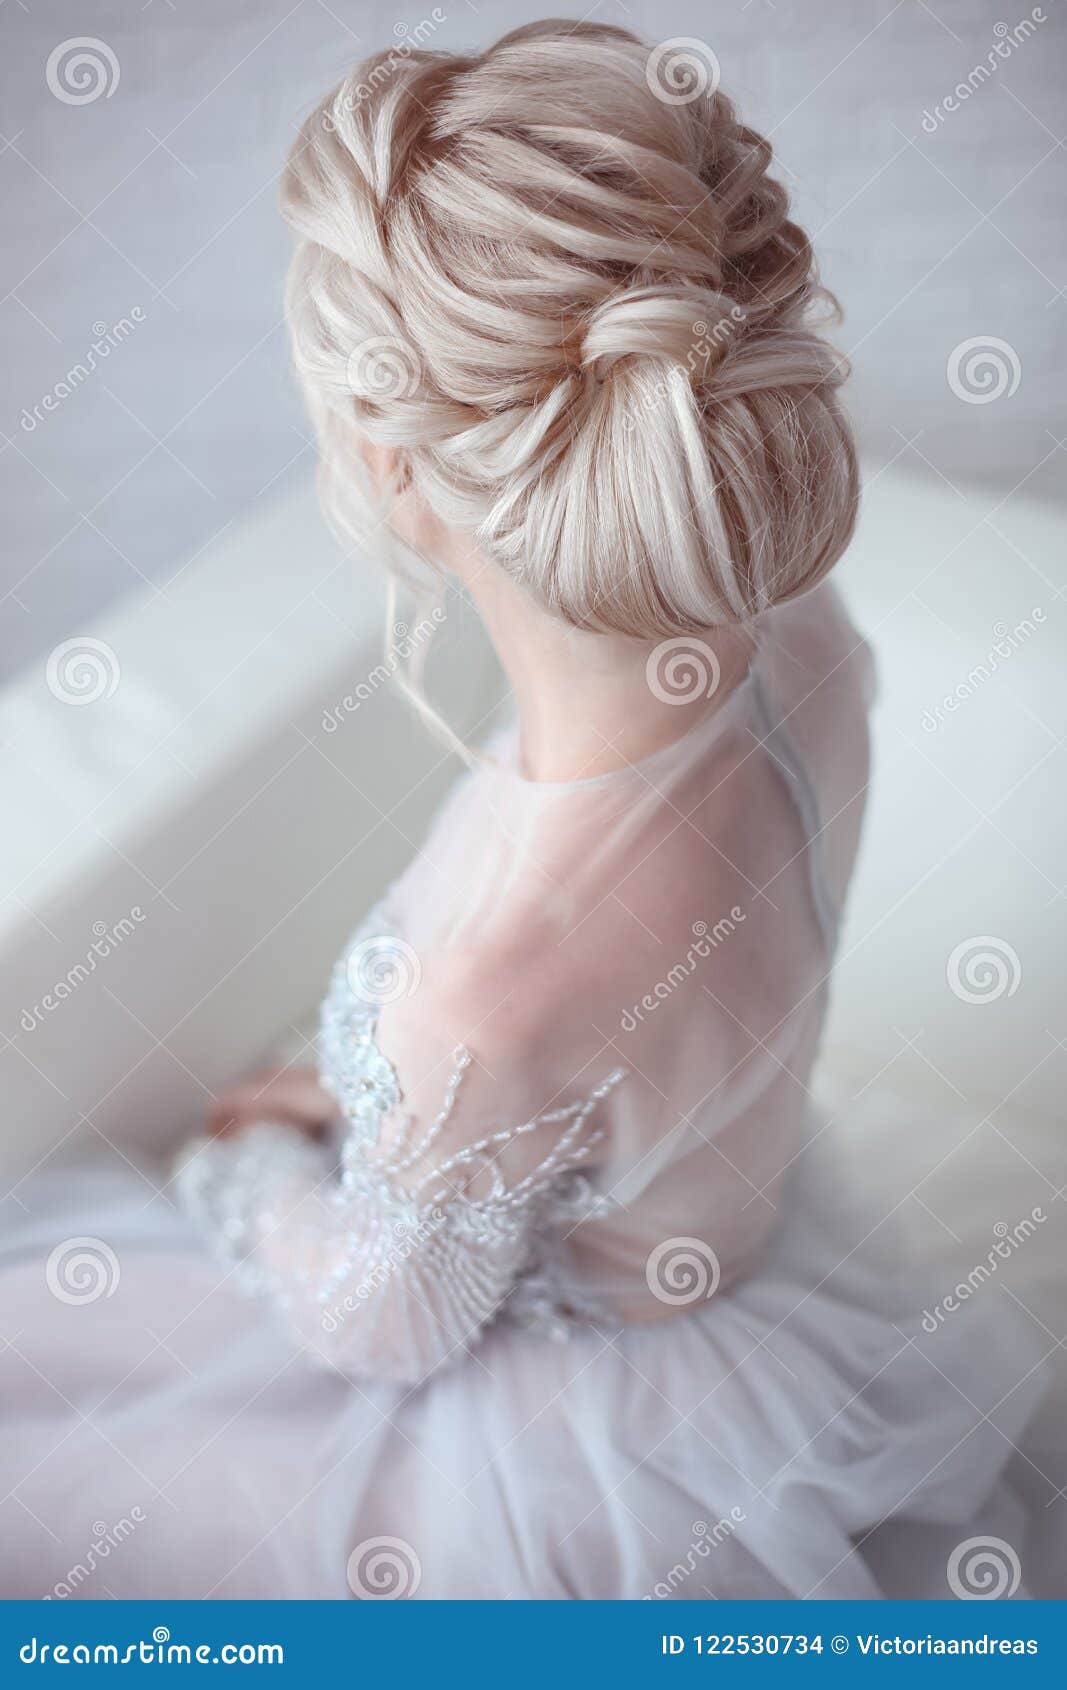 Beauty Wedding Hairstyle Bride Blond Girl With Curly Hair